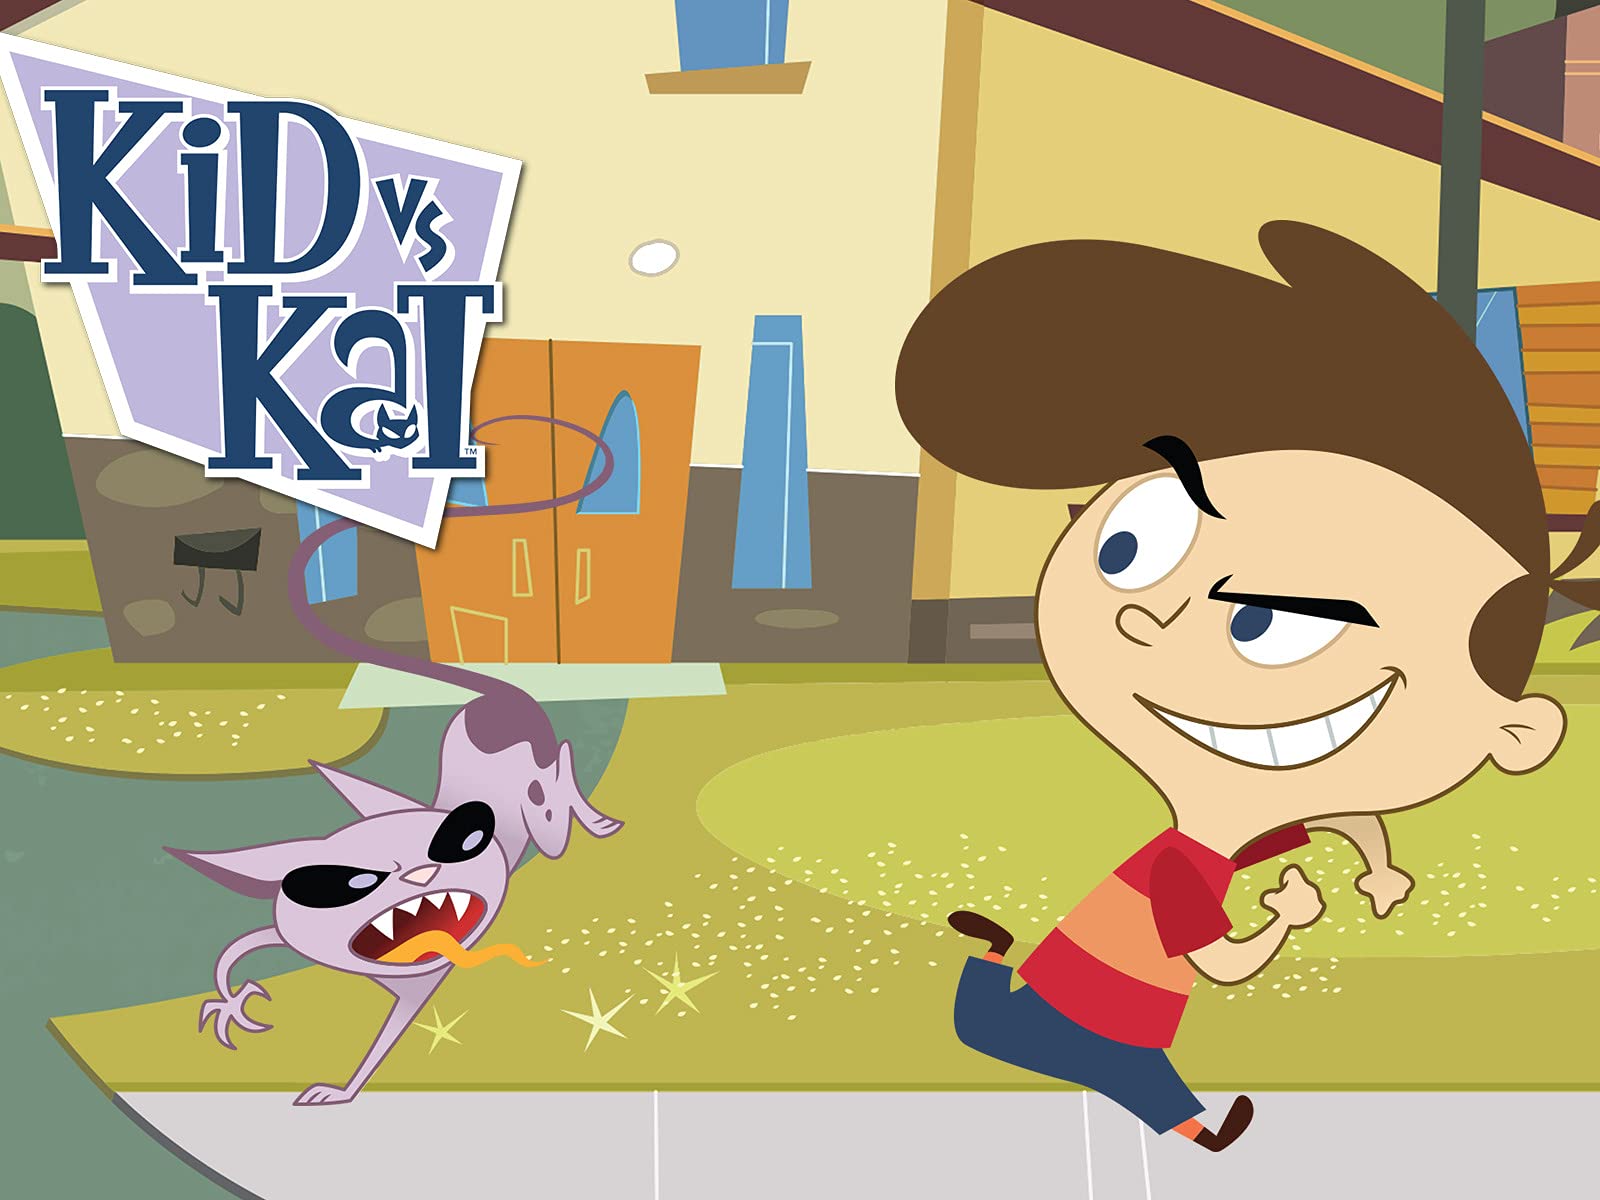 BRO I HOPE PPL REMEMBER THIS SHOW BC IT WAS ONE OF MY FAVS!! #rbx